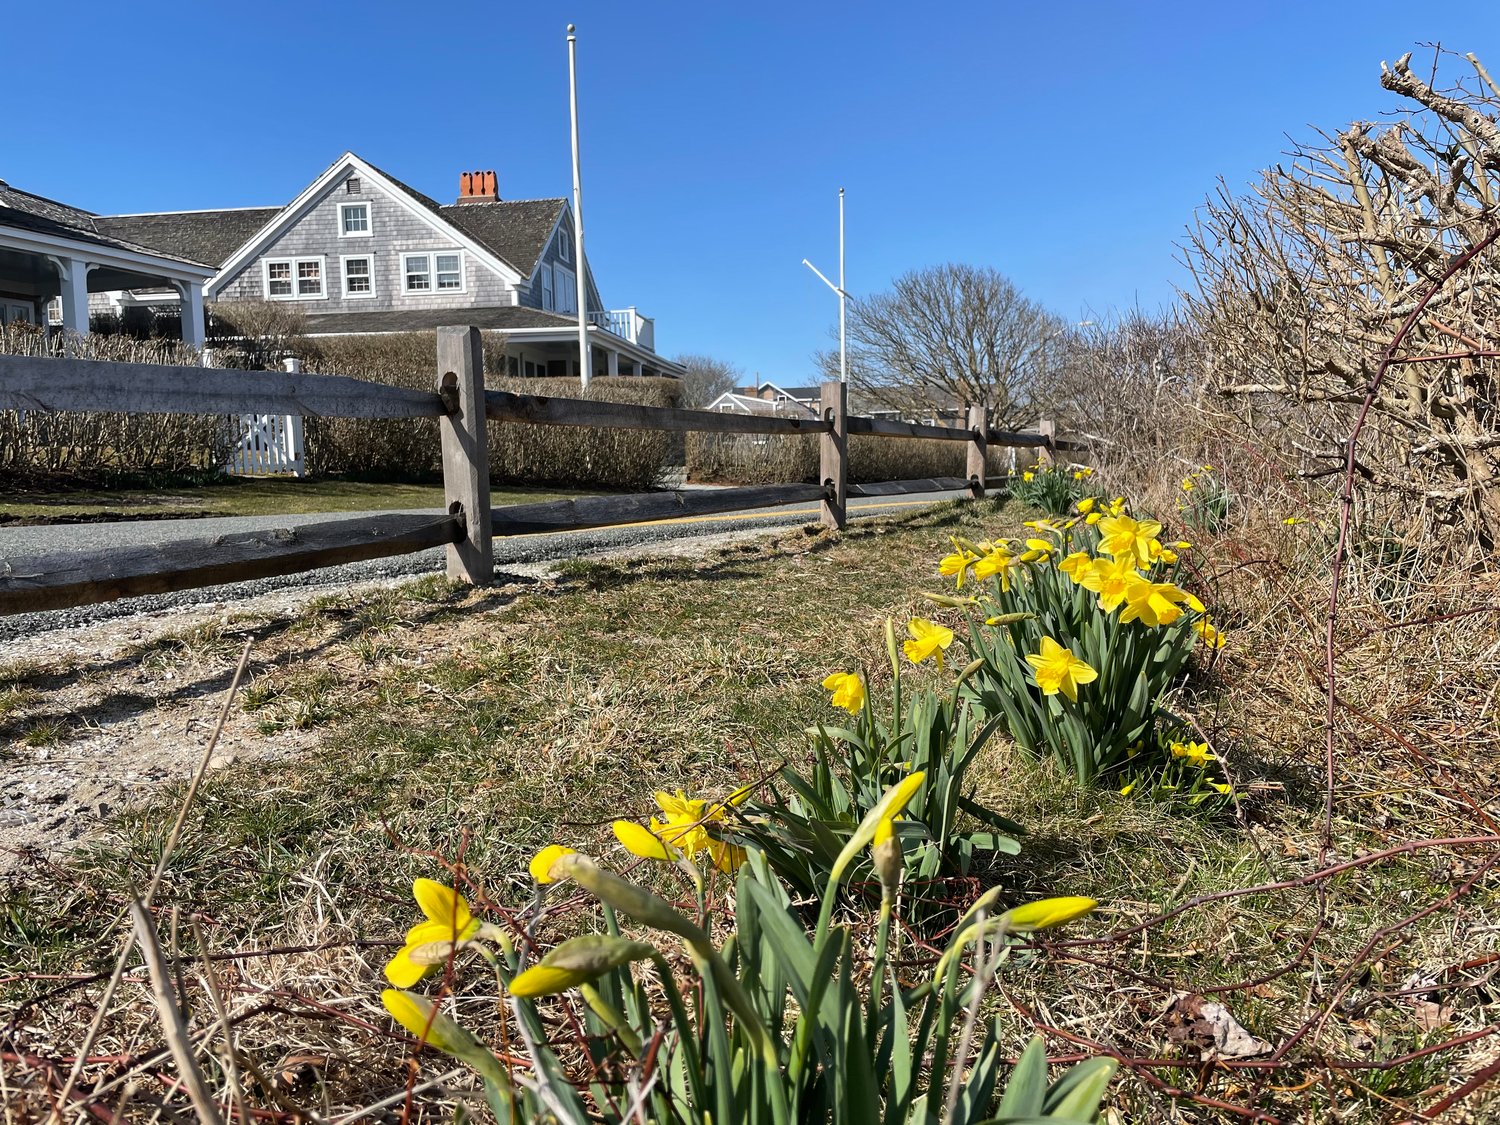 Daffodils in bloom in Sconset.